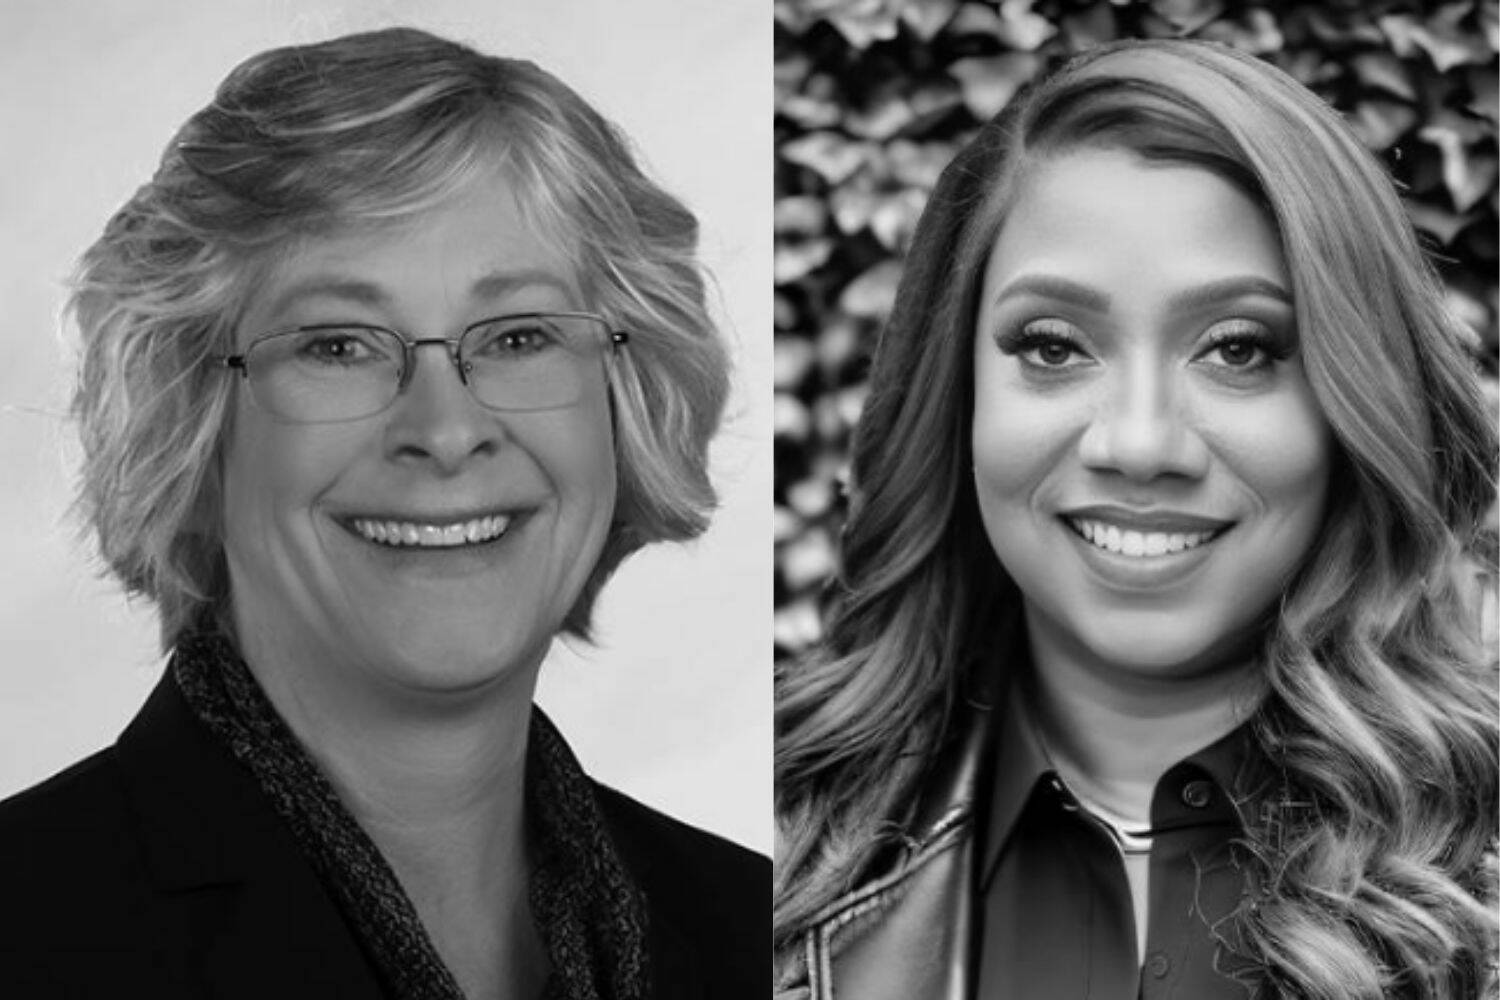 Screenshot from King County Elections website: 
Valerie O’Halloran, Council Position No. 3 incumbent (left), and Erica J. Conway, Council Position No. 3 candidate (right).